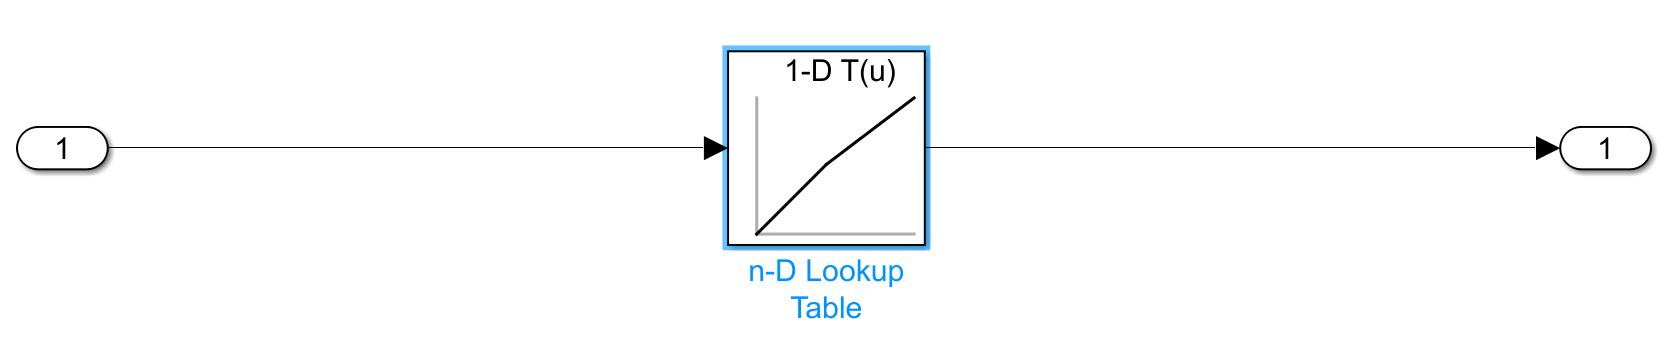 Model that contains a n-D Lookup Table connected between an Inport and an Outport.